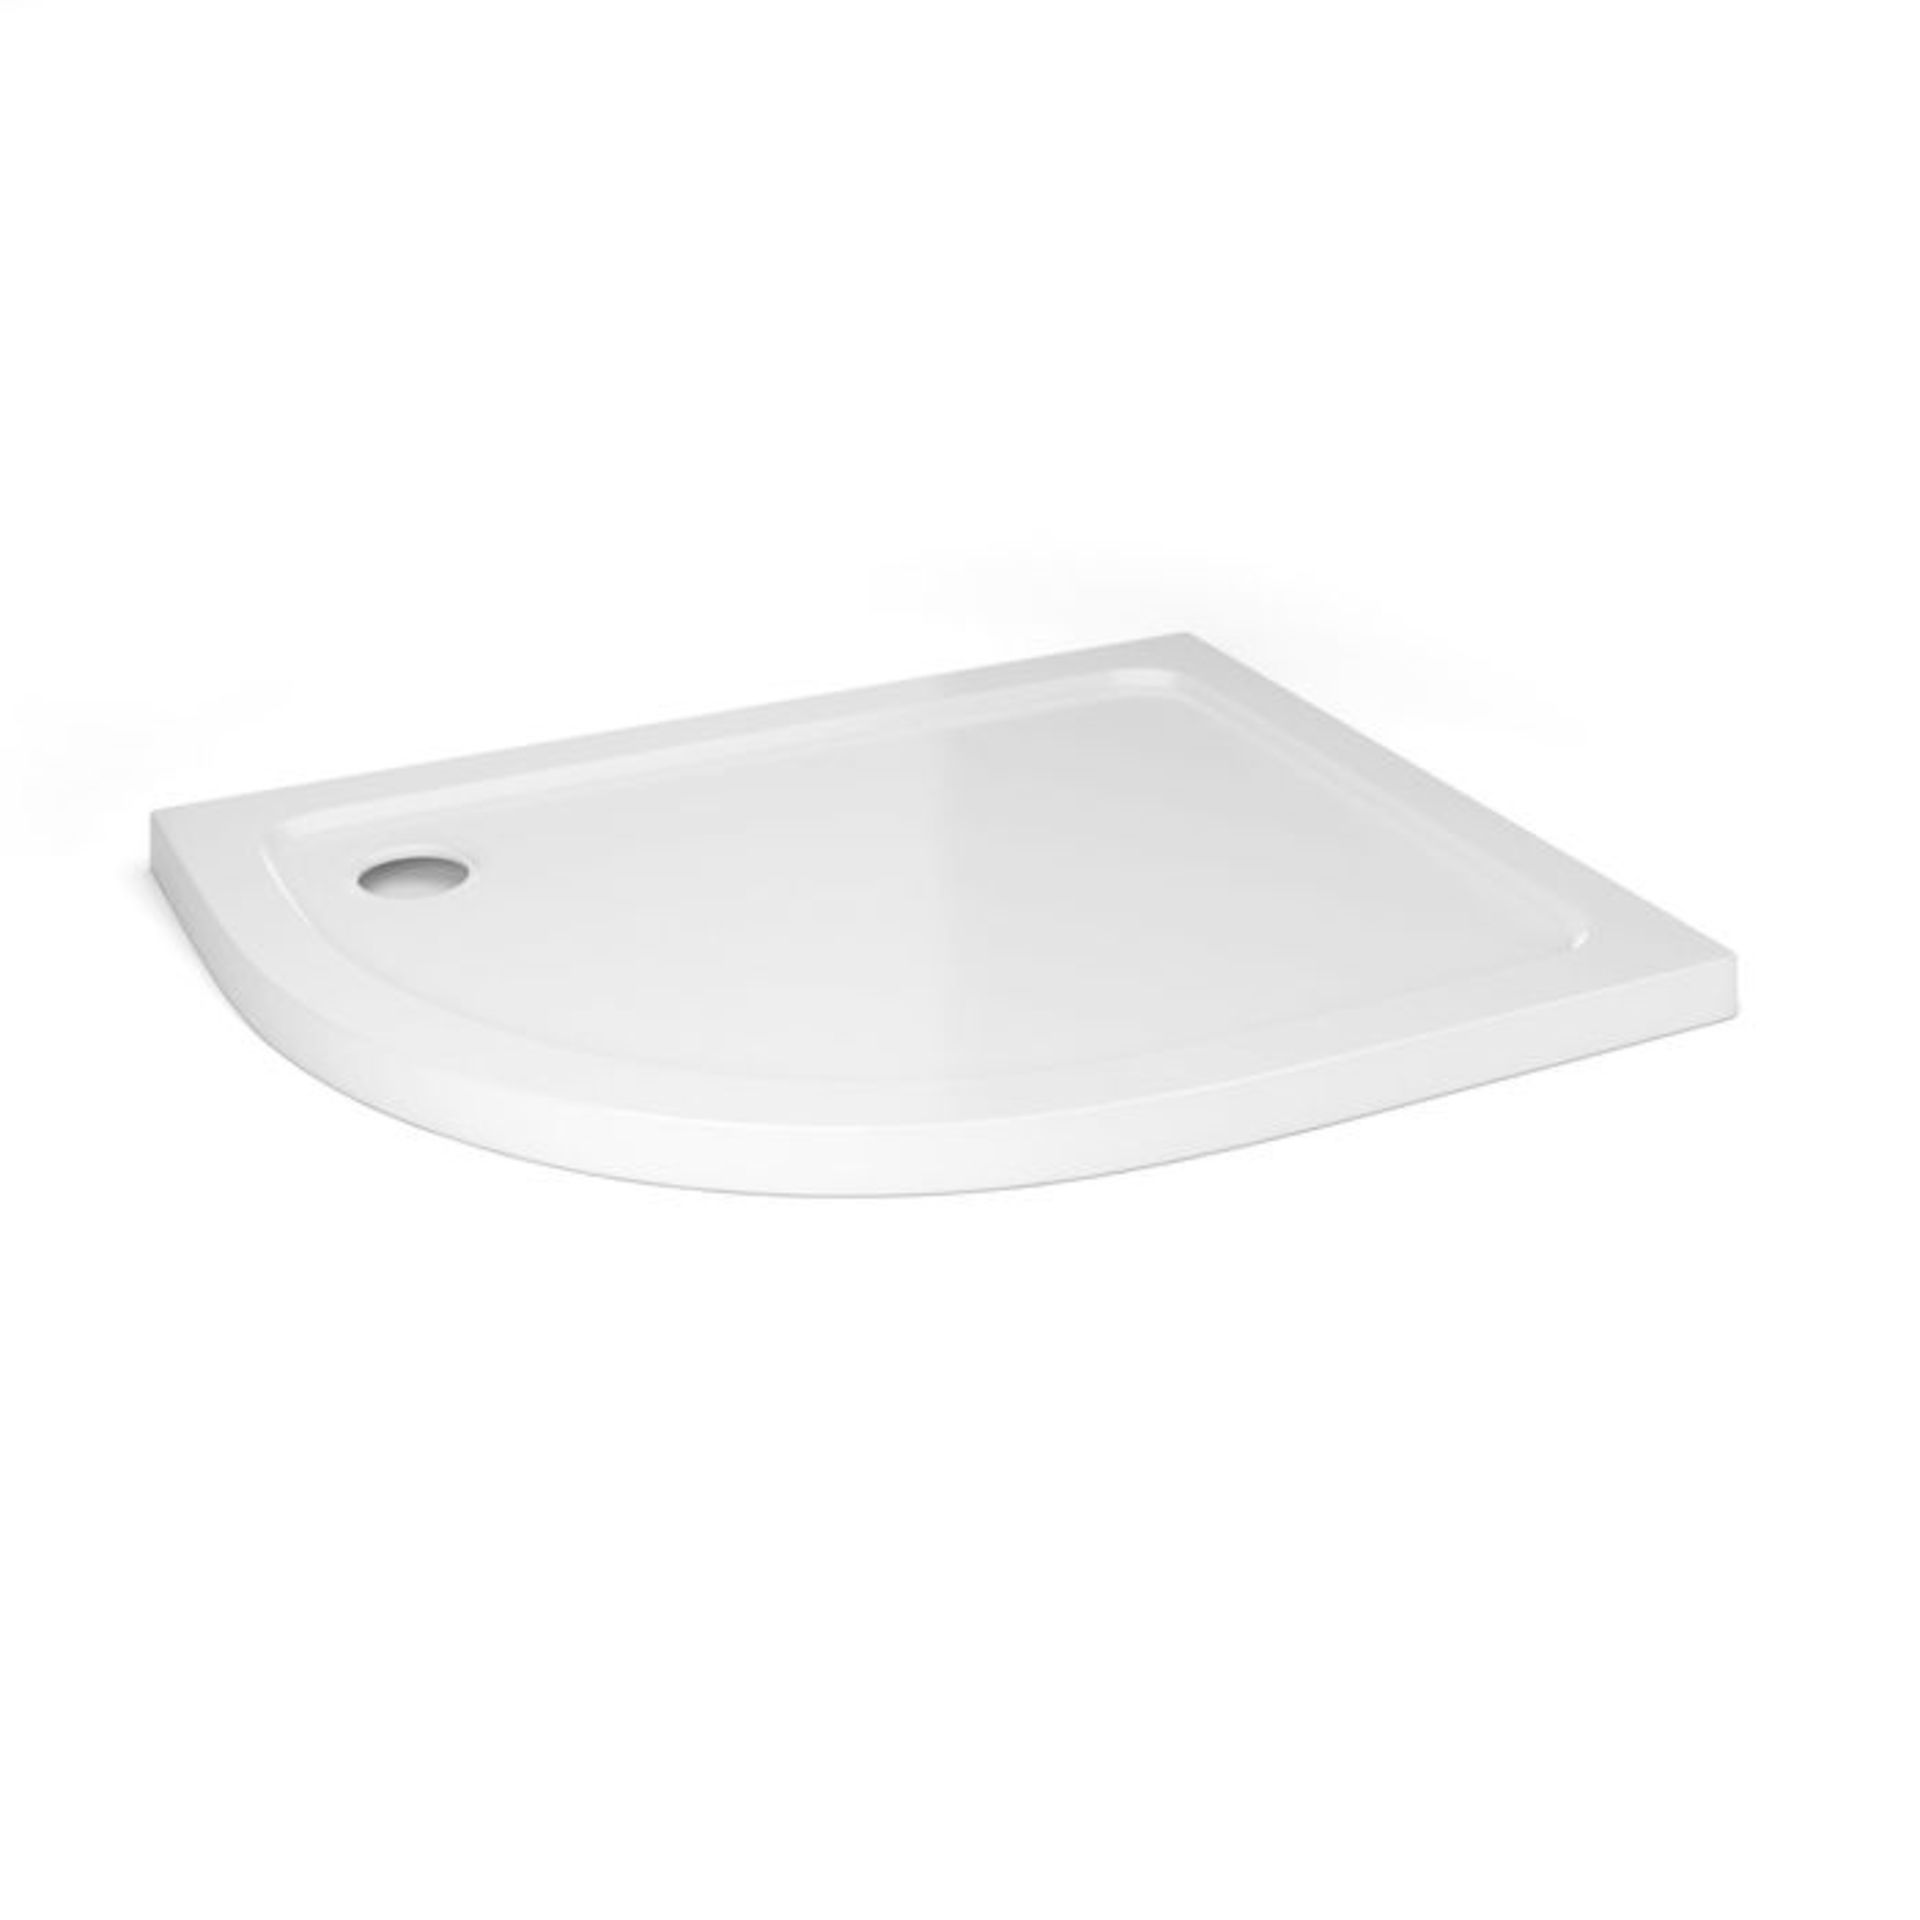 (DW24) 1000x800mm Offset Quadrant Ultra Slim Stone Shower Tray - Left. Constructed from acryli... - Image 2 of 2